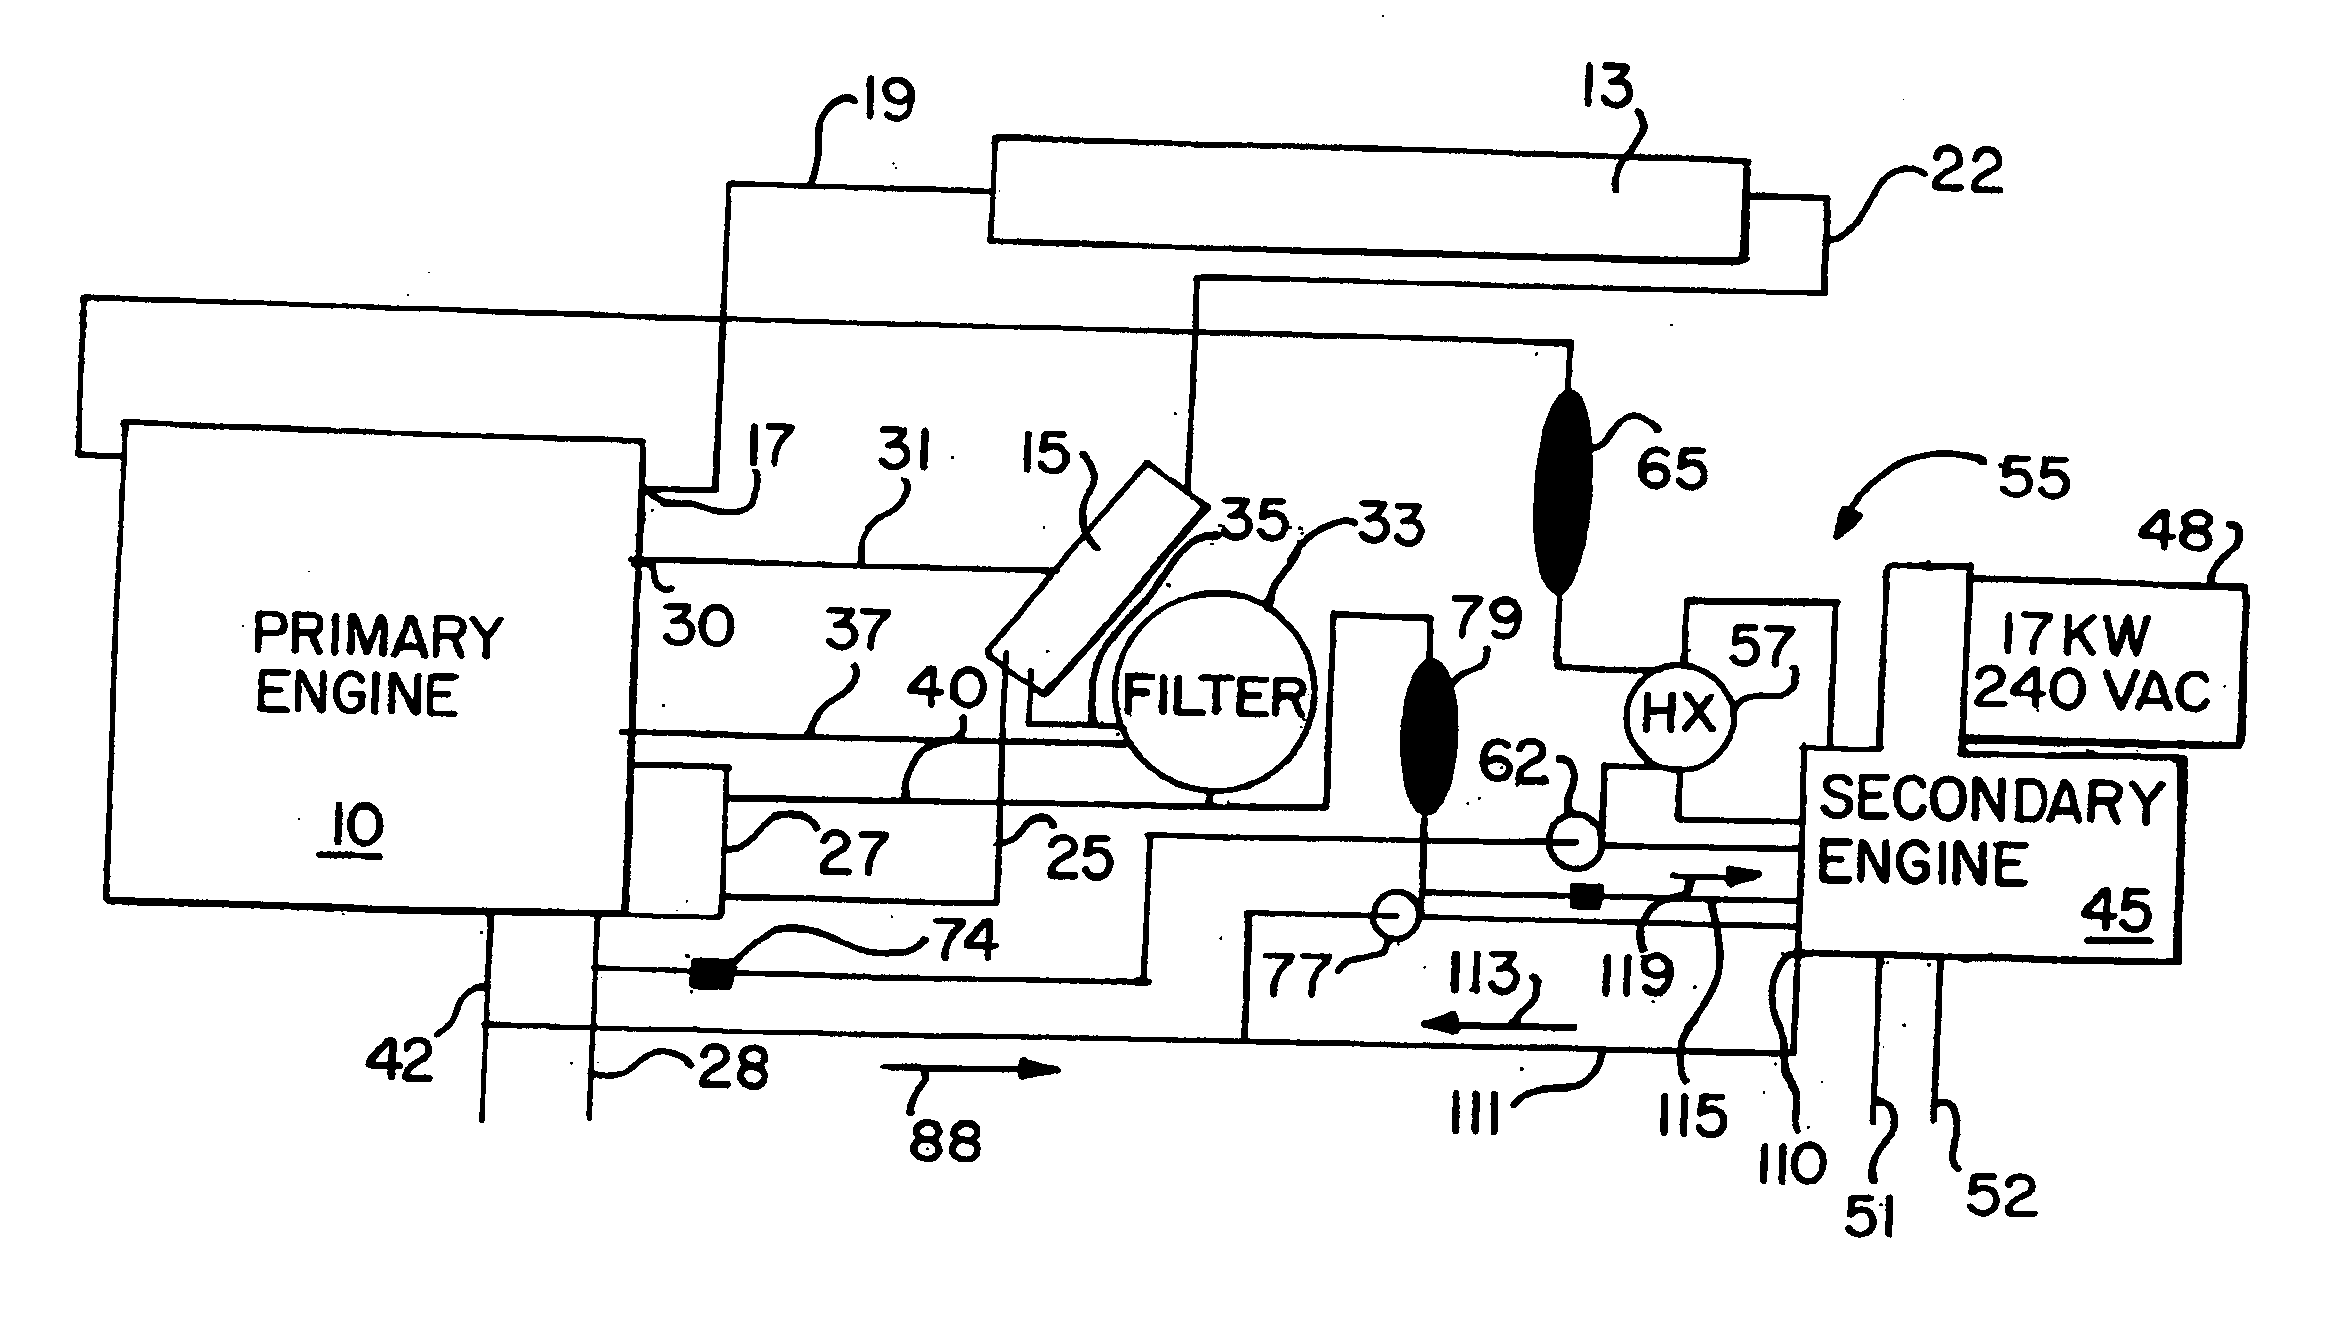 System and method for supplying auxiliary power to a large diesel engine